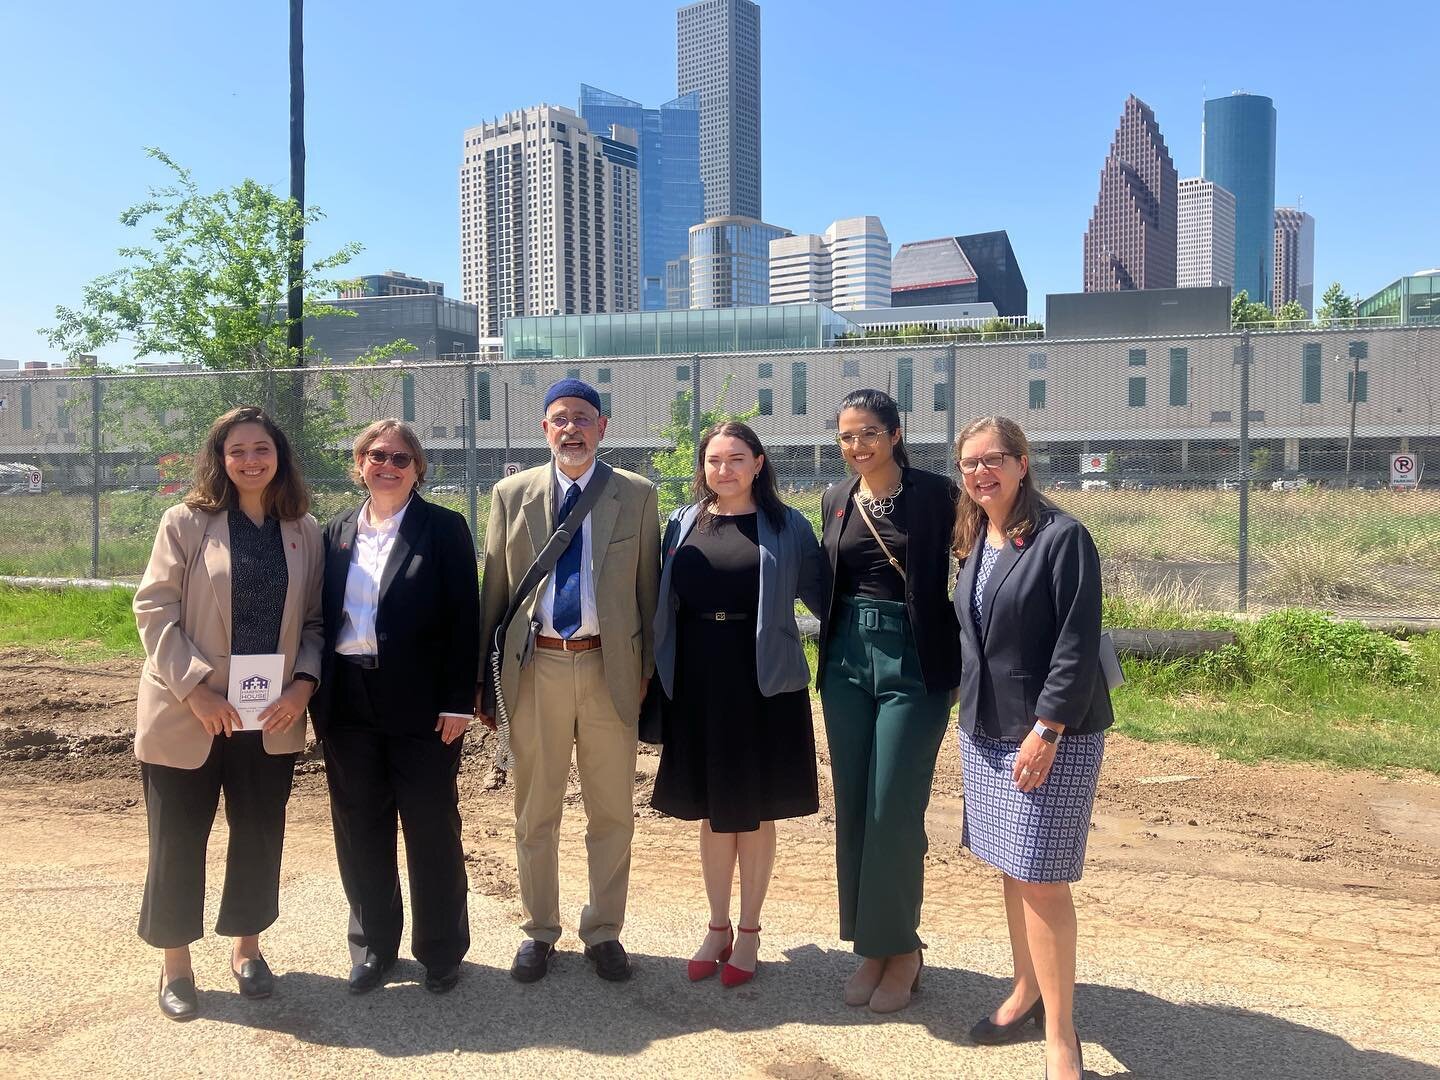 Harmony House&rsquo;s Ribbon Cutting Ceremony on Friday was our opportunity to celebrate over a decade of planning and designing for this very important Houston organization.  We are so excited about the new quality, affordable housing becoming avail